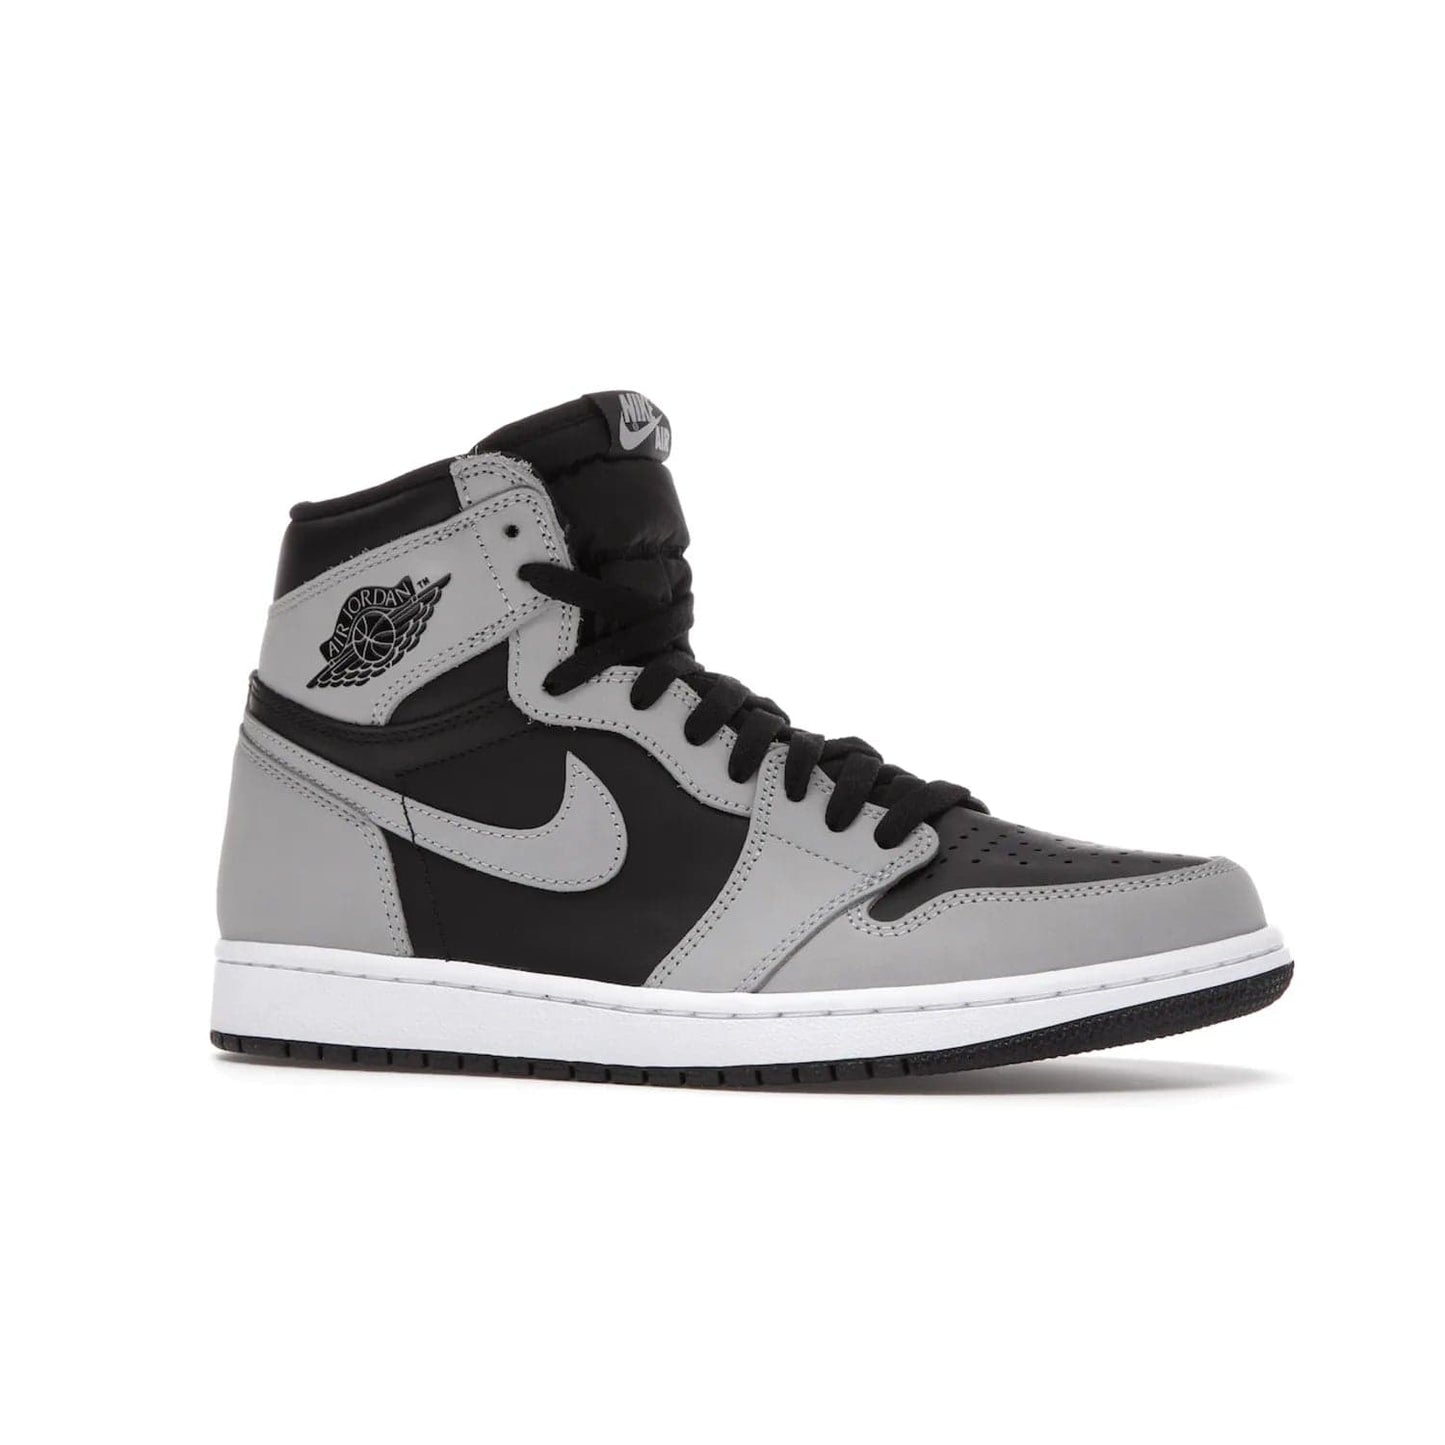 Jordan 1 Retro High Shadow 2.0 - Image 3 - Only at www.BallersClubKickz.com - #
Classic Air Jordan 1 Retro High Shadow 2.0 with black leather base and Light Smoke Grey overlays. Released in May 2021.